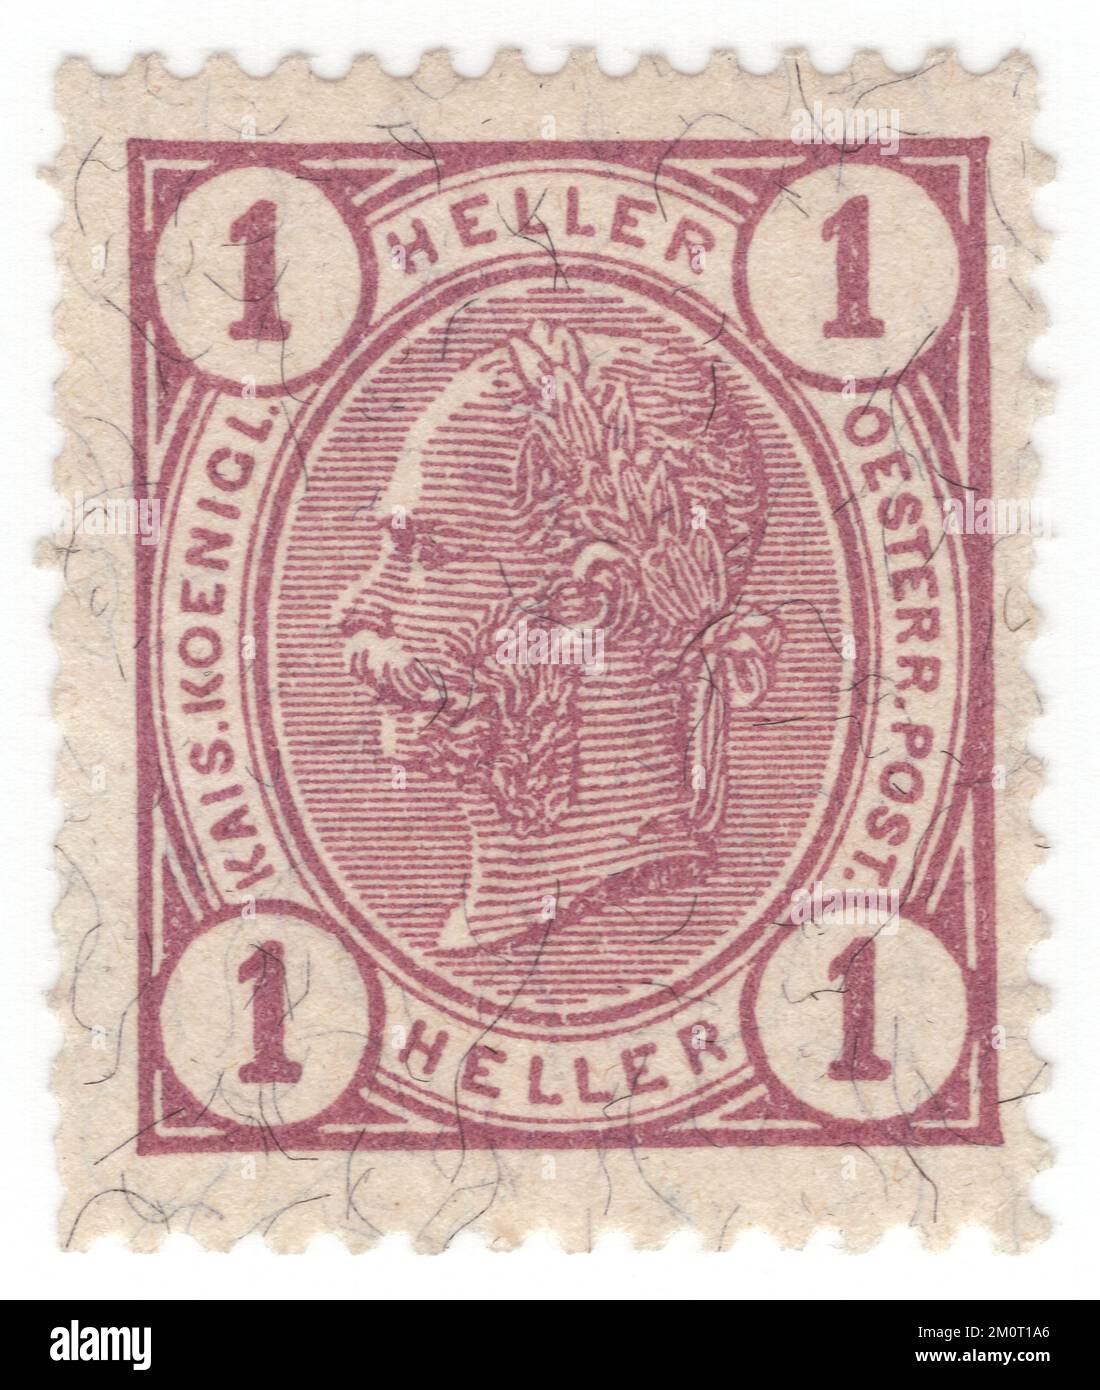 AUSTRIA — 1905: An 1 heller lilac postage stamp depicting Embossed portrait of young Austrian Monarch Emperor Franz Josef. Franz Joseph I or Francis Joseph I was Emperor of Austria, King of Hungary, and the other states of the Habsburg monarchy from 2 December 1848 until his death on 21 November 1916. In the early part of his reign, his realms and territories were referred to as the Austrian Empire, but were reconstituted as the dual monarchy of the Austro-Hungarian Empire in 1867. From 1 May 1850 to 24 August 1866, Franz Joseph was also President of the German Confederation Stock Photo